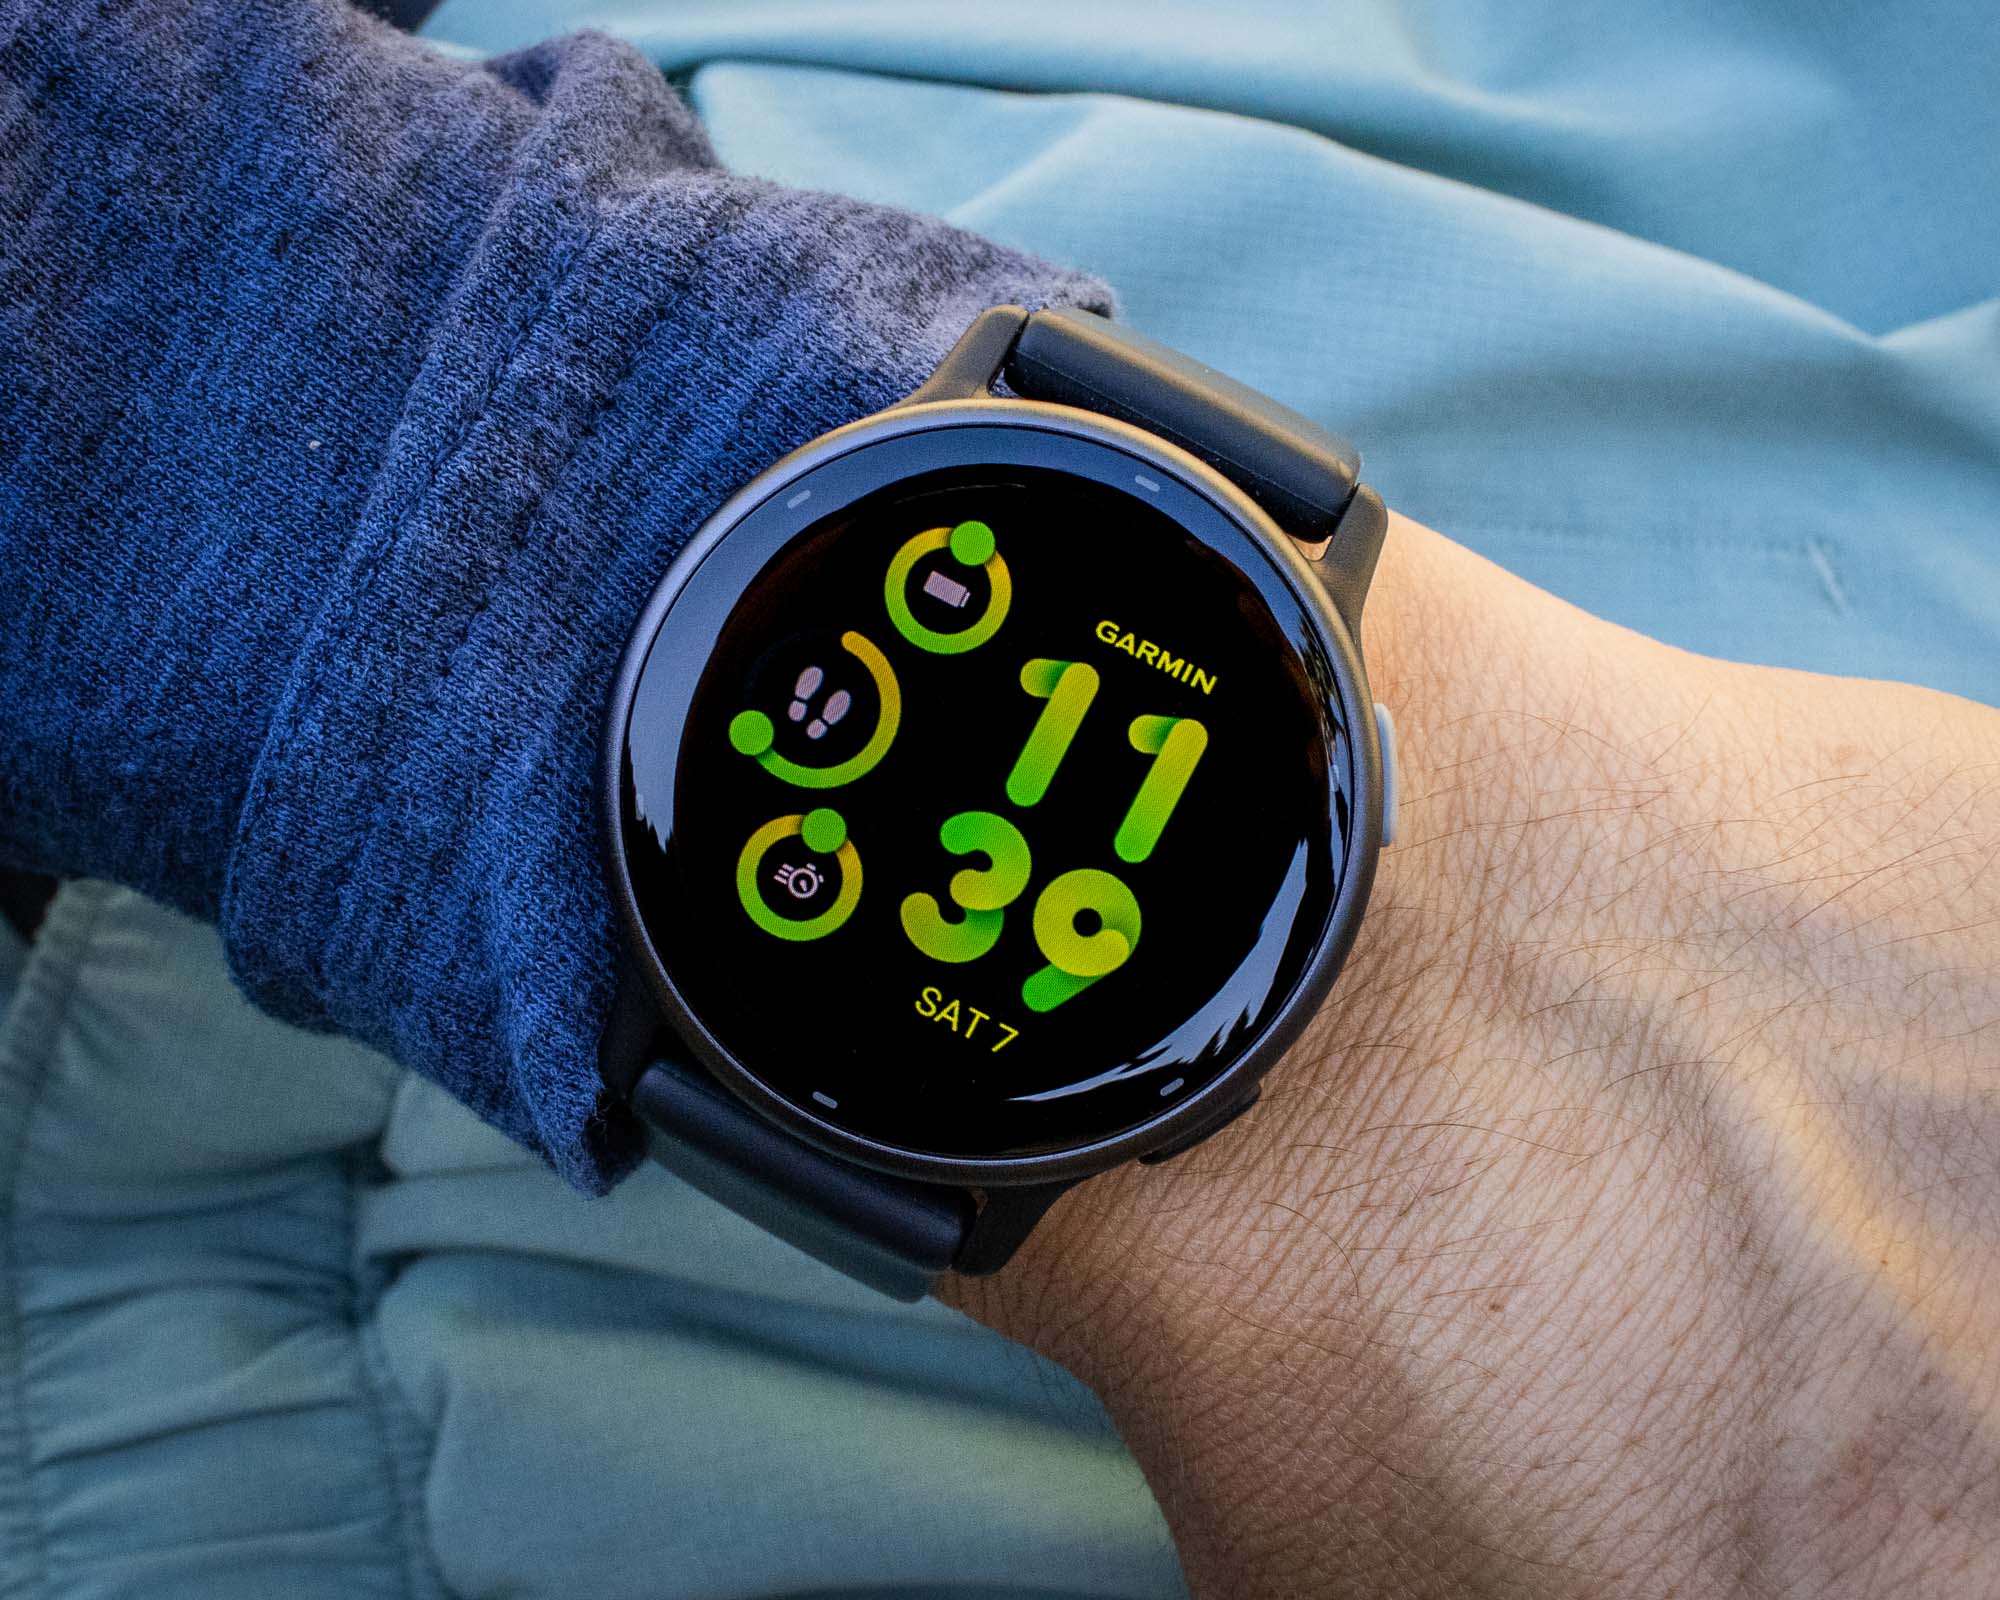 Garmin vivoactive 5: Price, features, and everything you need to know